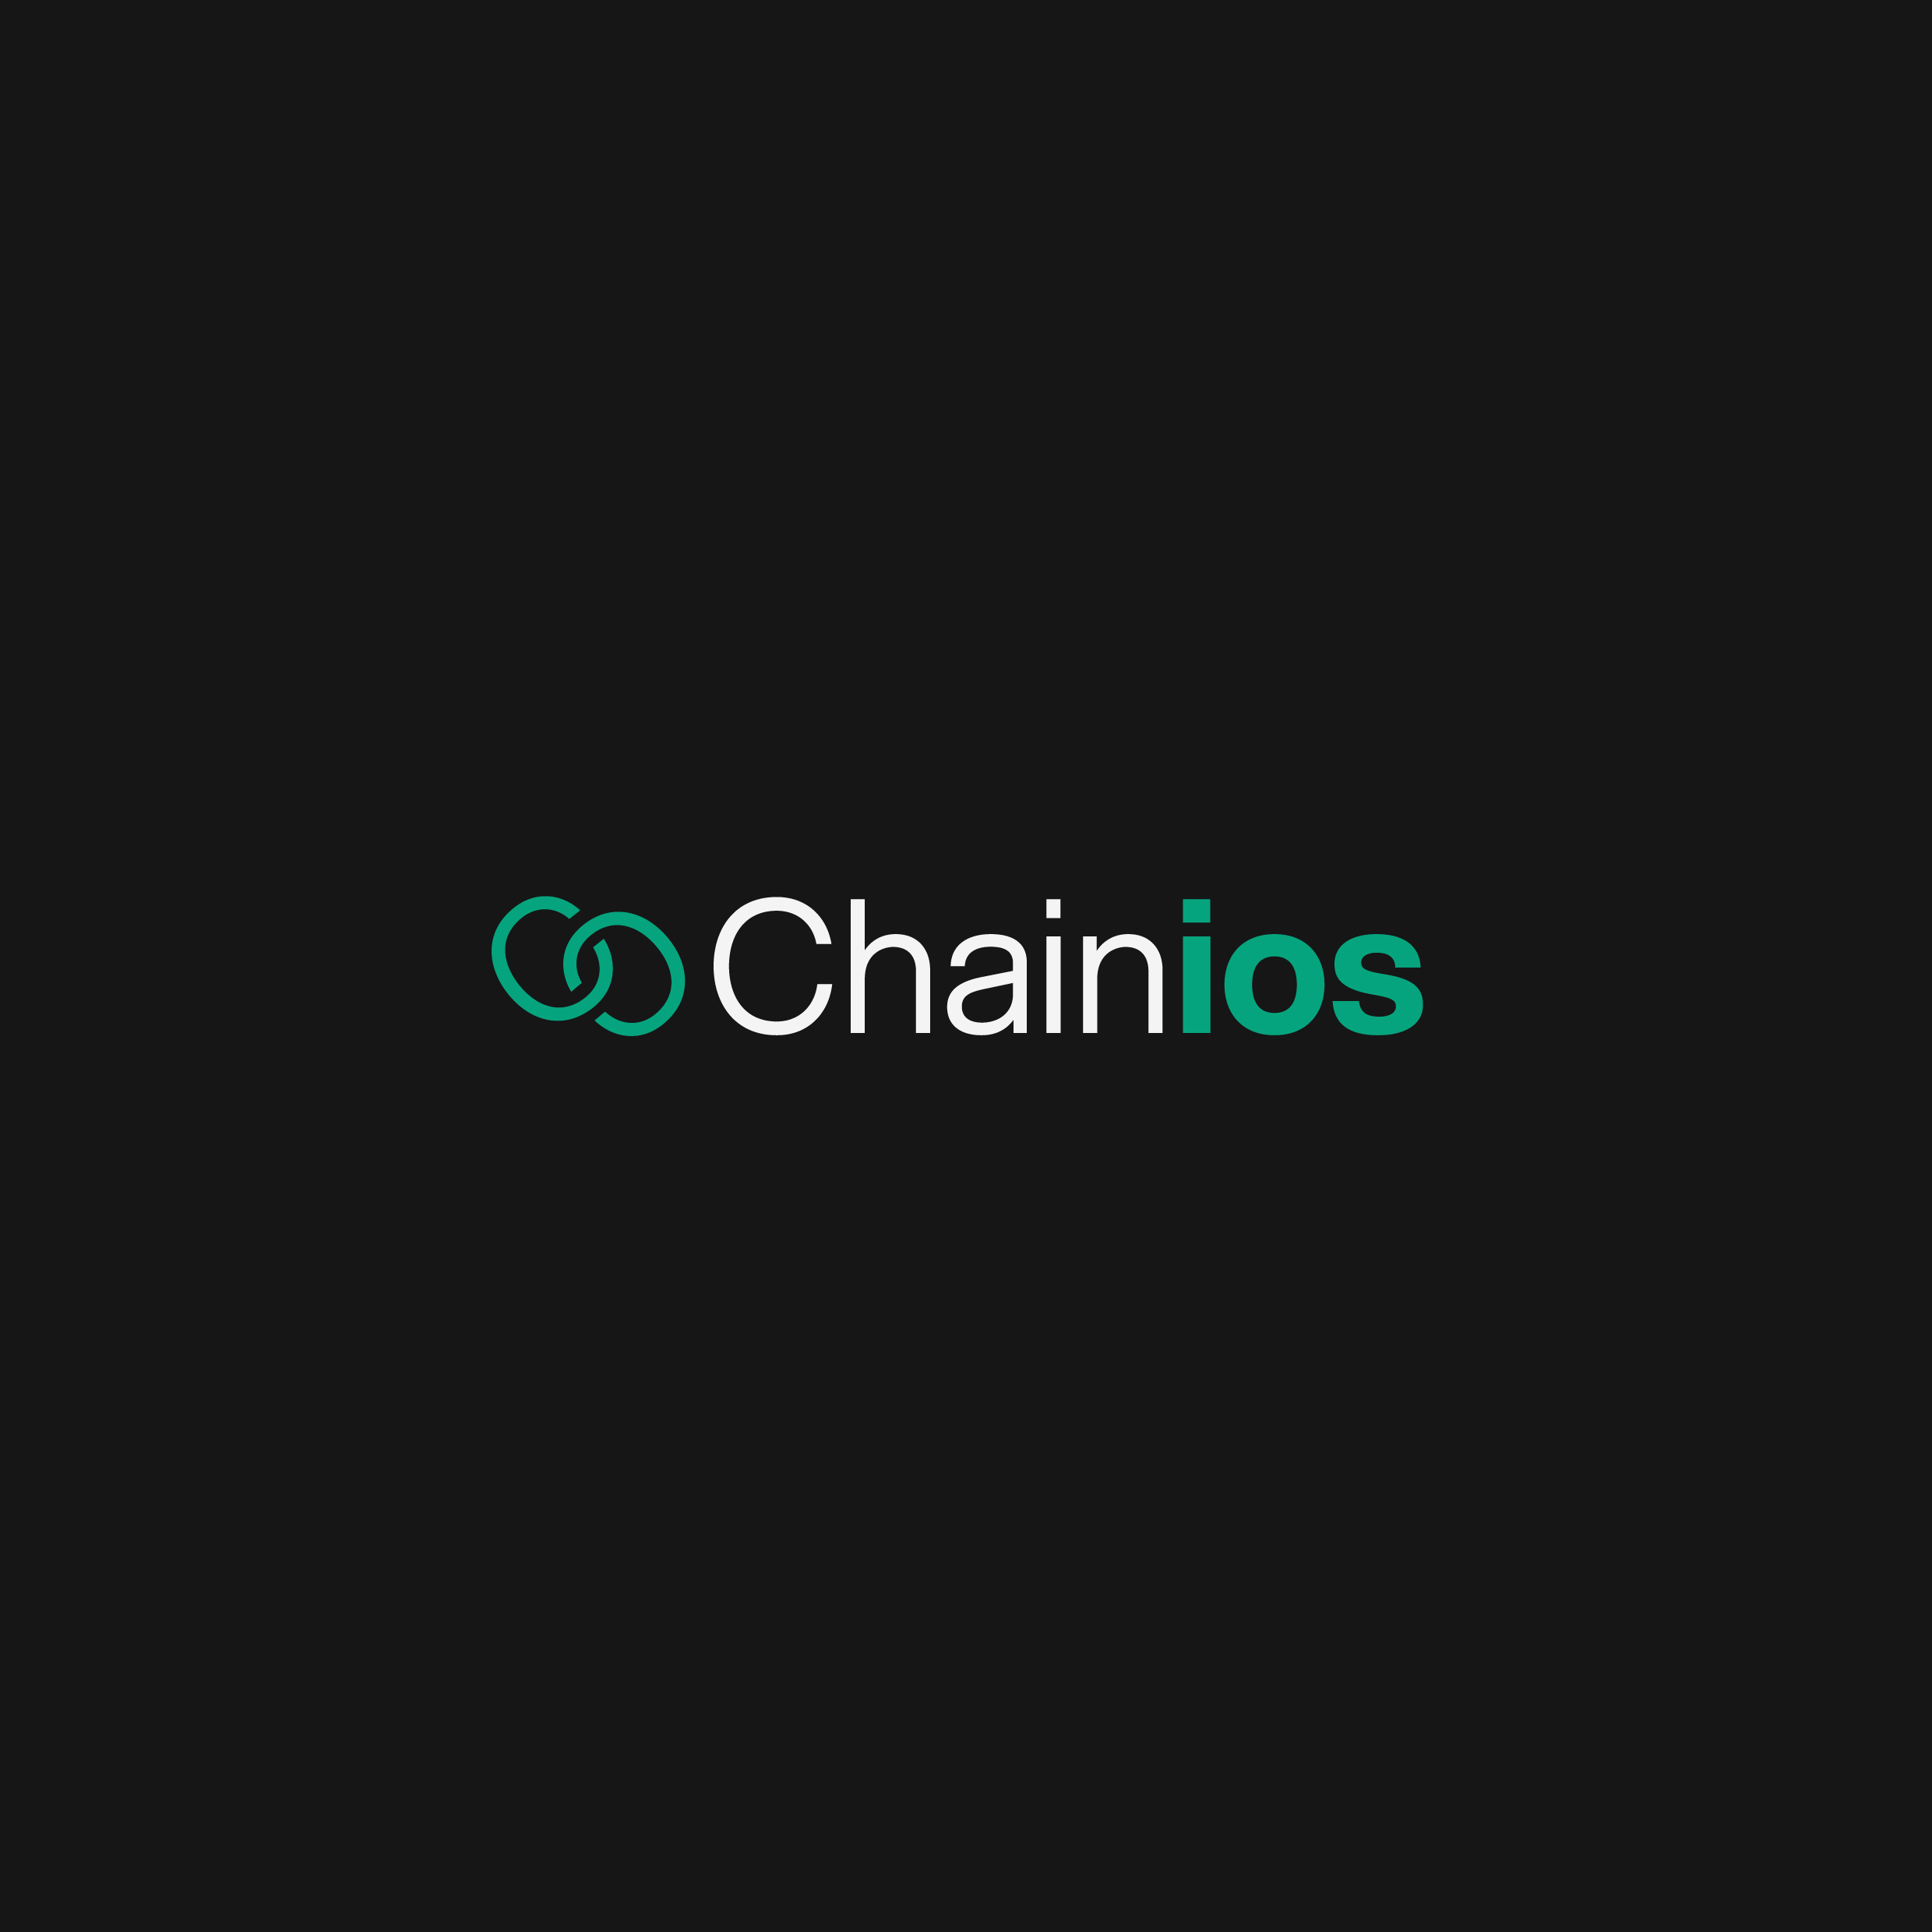 Introducing Chainios.com – Your Trusted Licensed and Regulated Digital Lending Solution